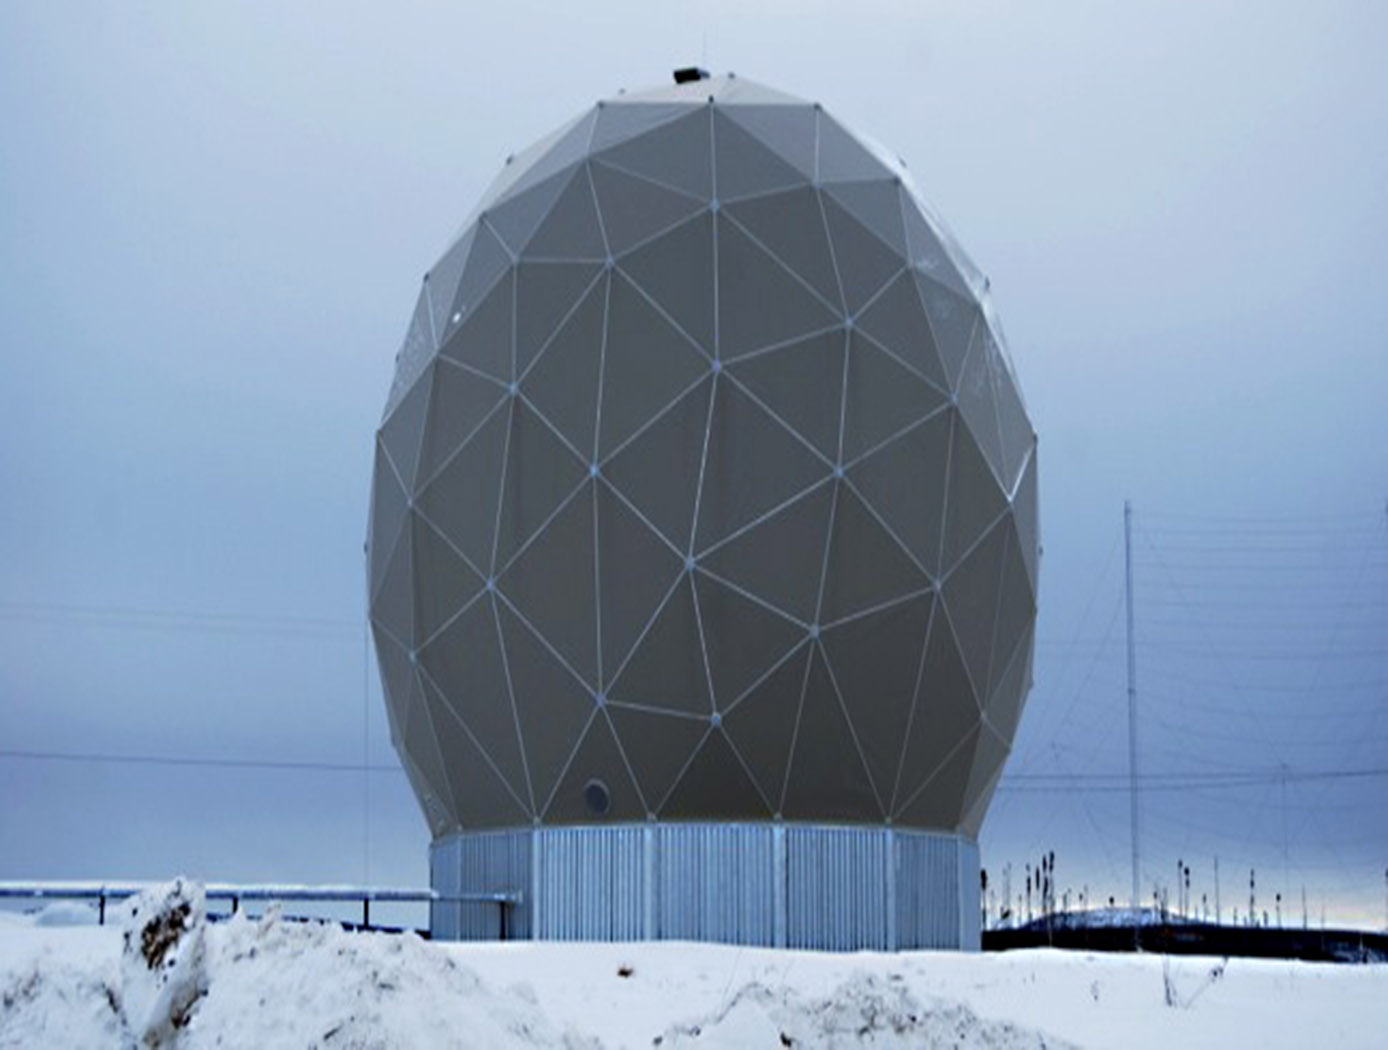 Inside this geodesic dome is the 11-meter Universal Space Network (USN) Poker Flat Satellite Station antenna in Poker Flats, Alaska. This satellite supports communication with many NASA satellites, especially those in low earth orbit at high inclinations.